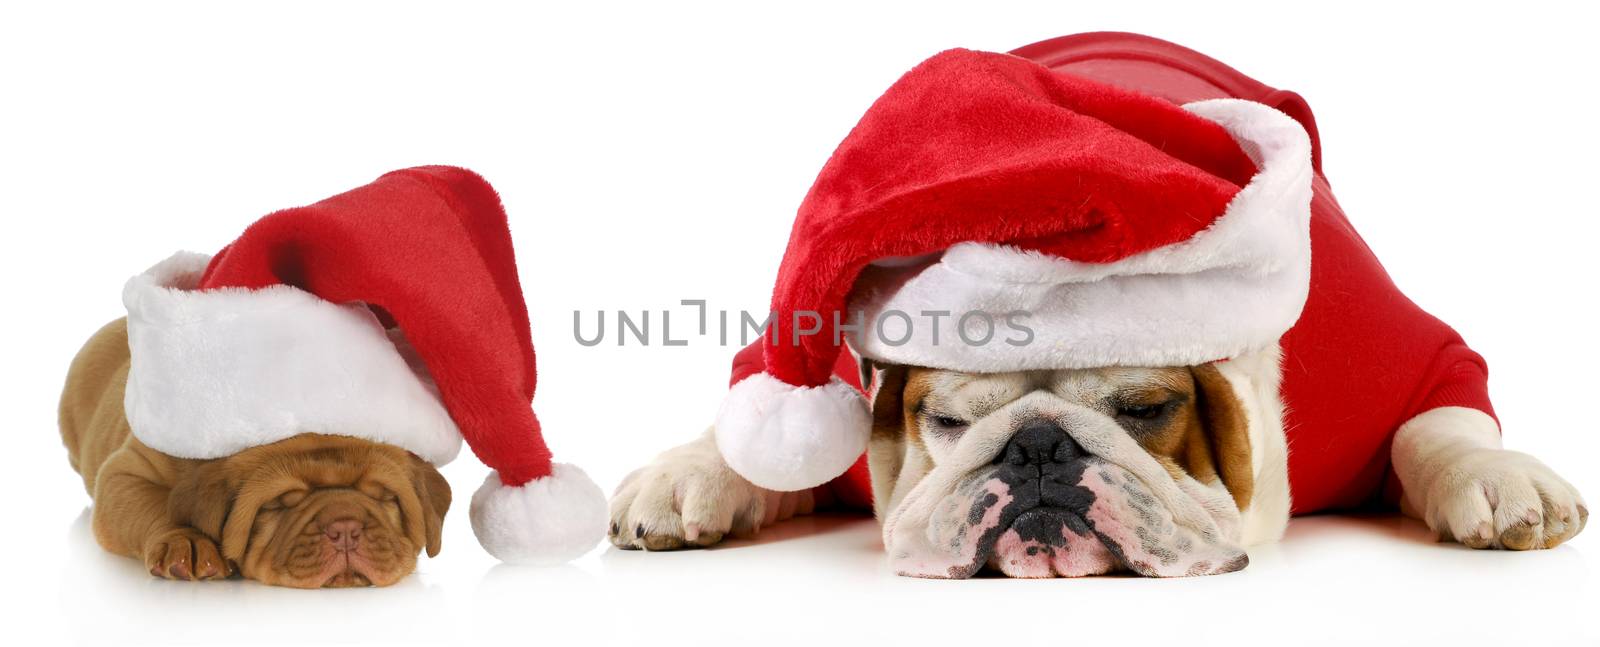 dog santa by willeecole123